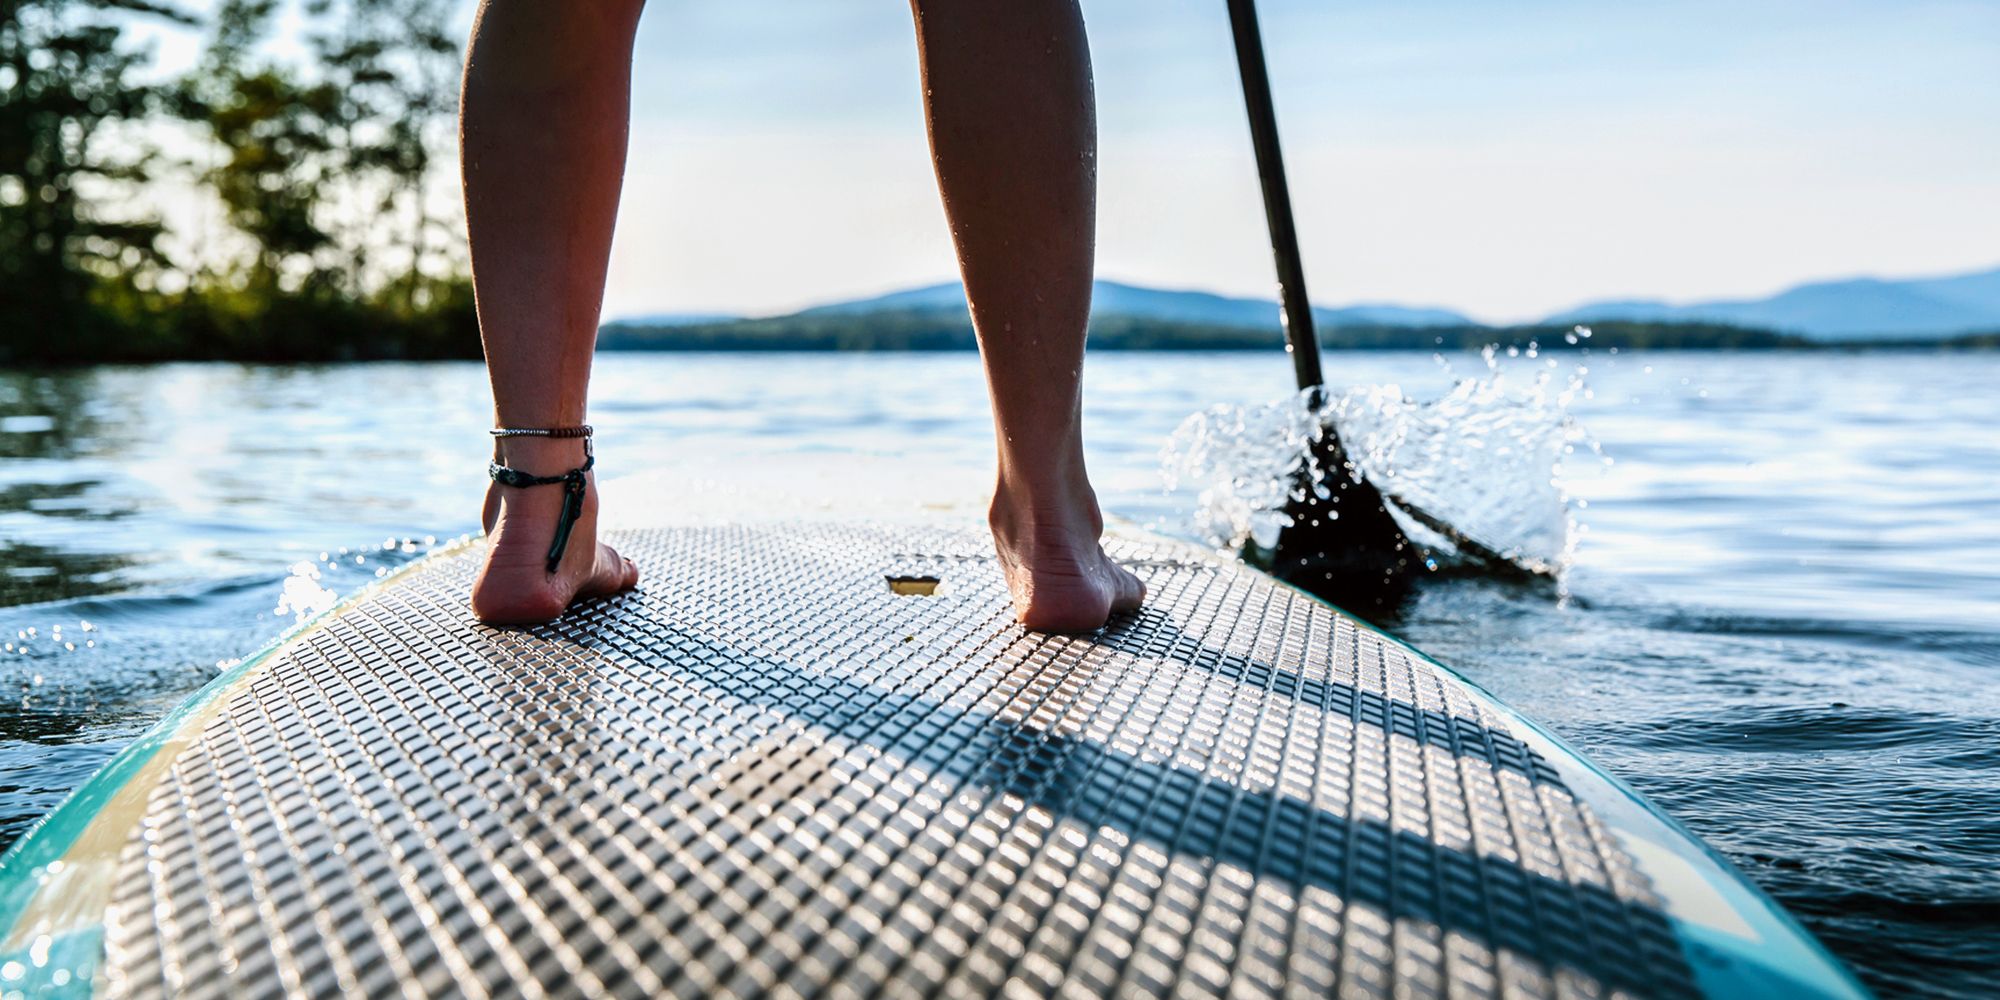 9 Best Stand-Up Paddle Boards to Buy in 2022 - SUP Board Reviews